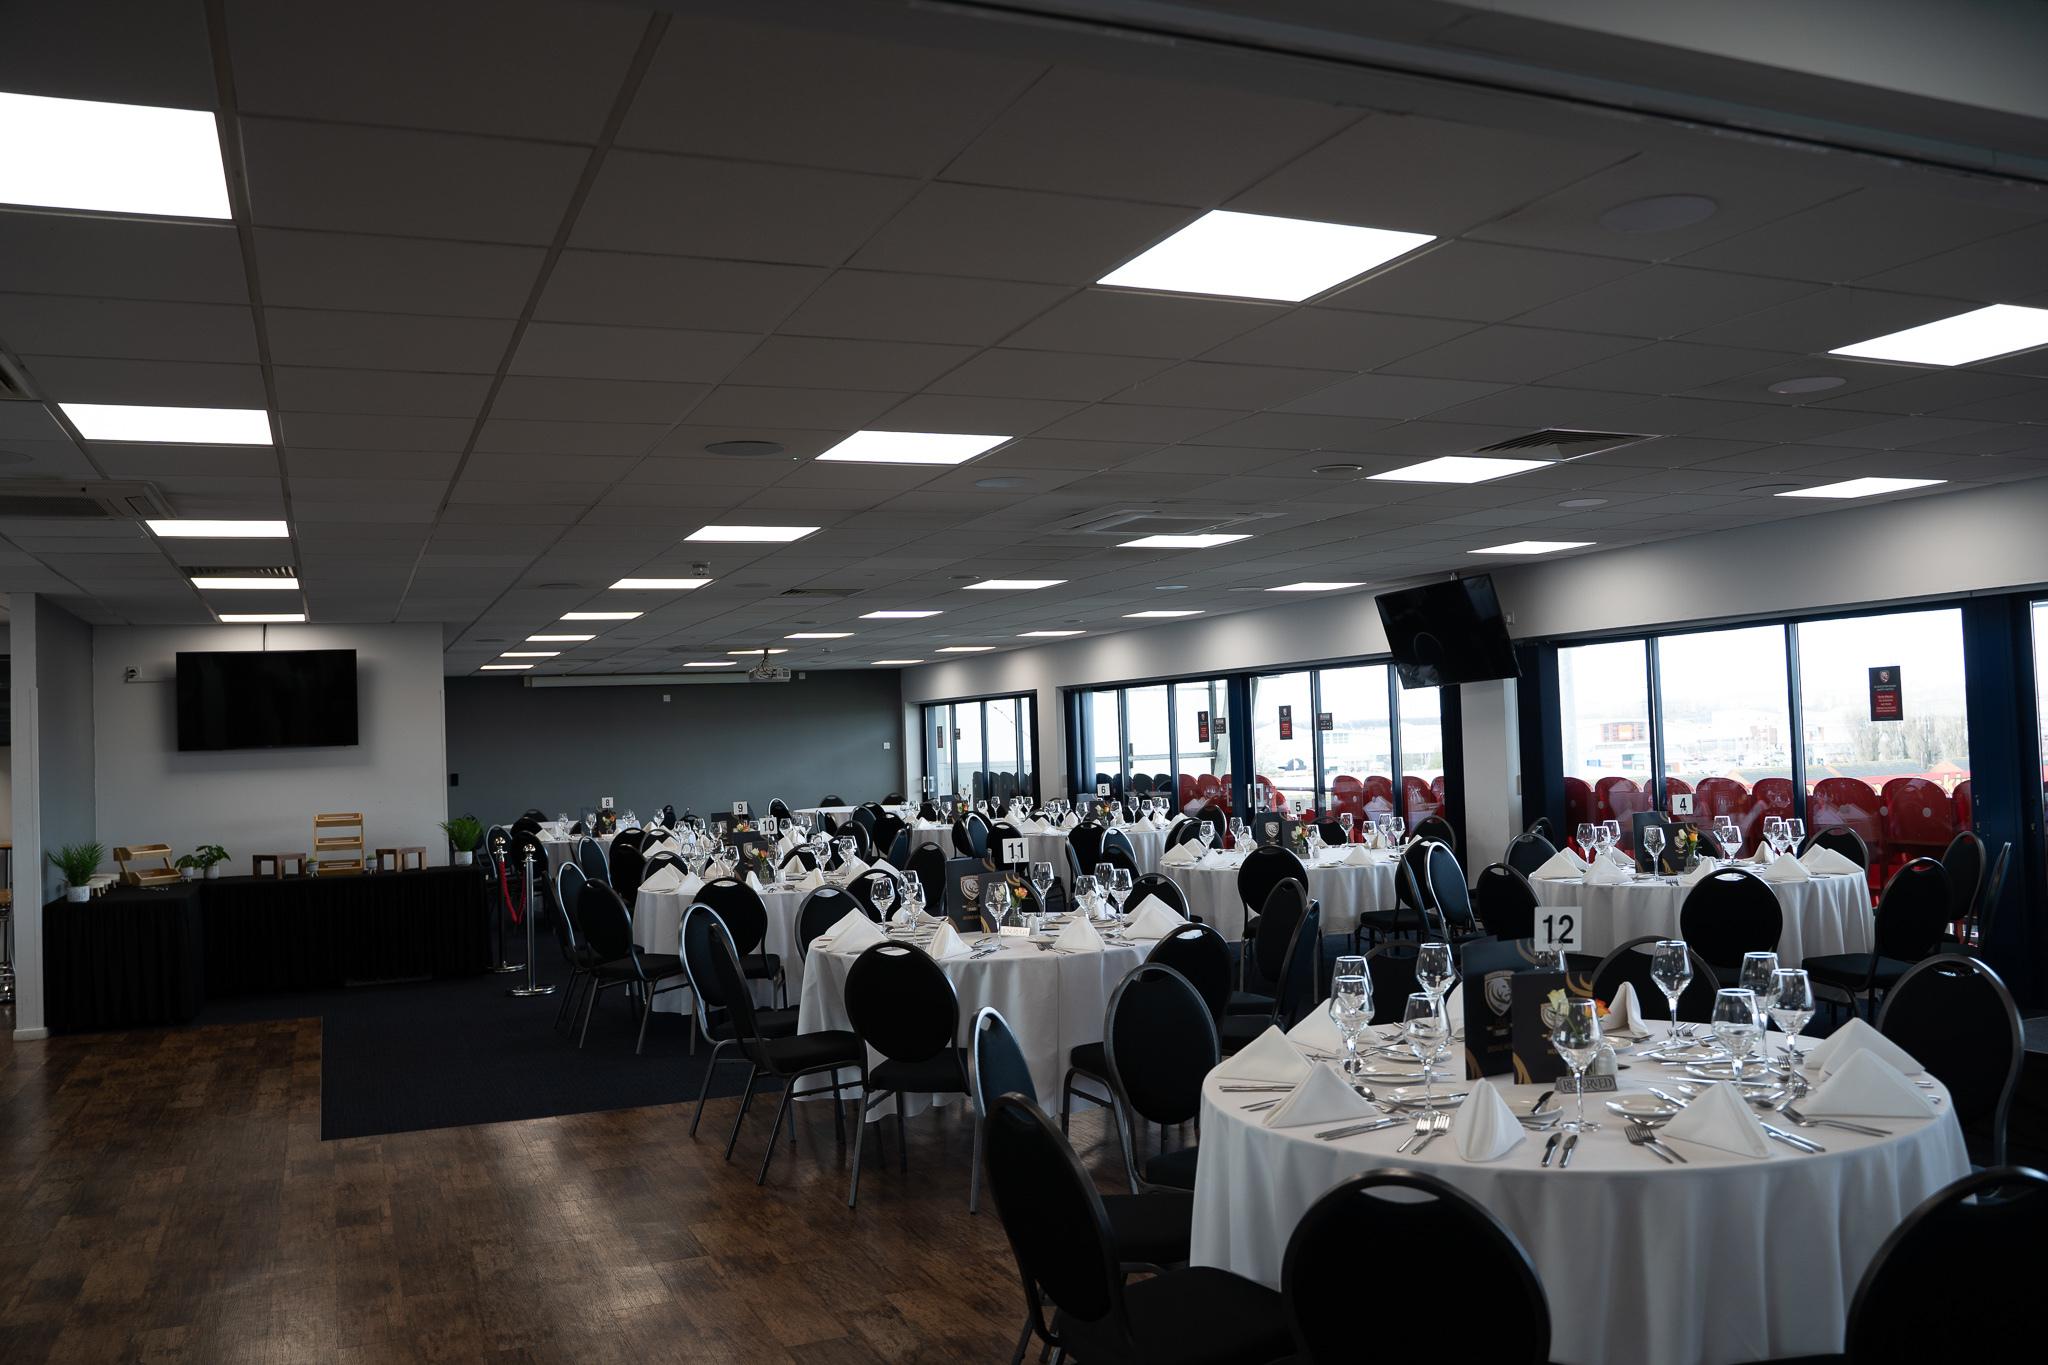 Gloucester Rugby Club: Kingsholm Stadium, Captains Lounge photo #1